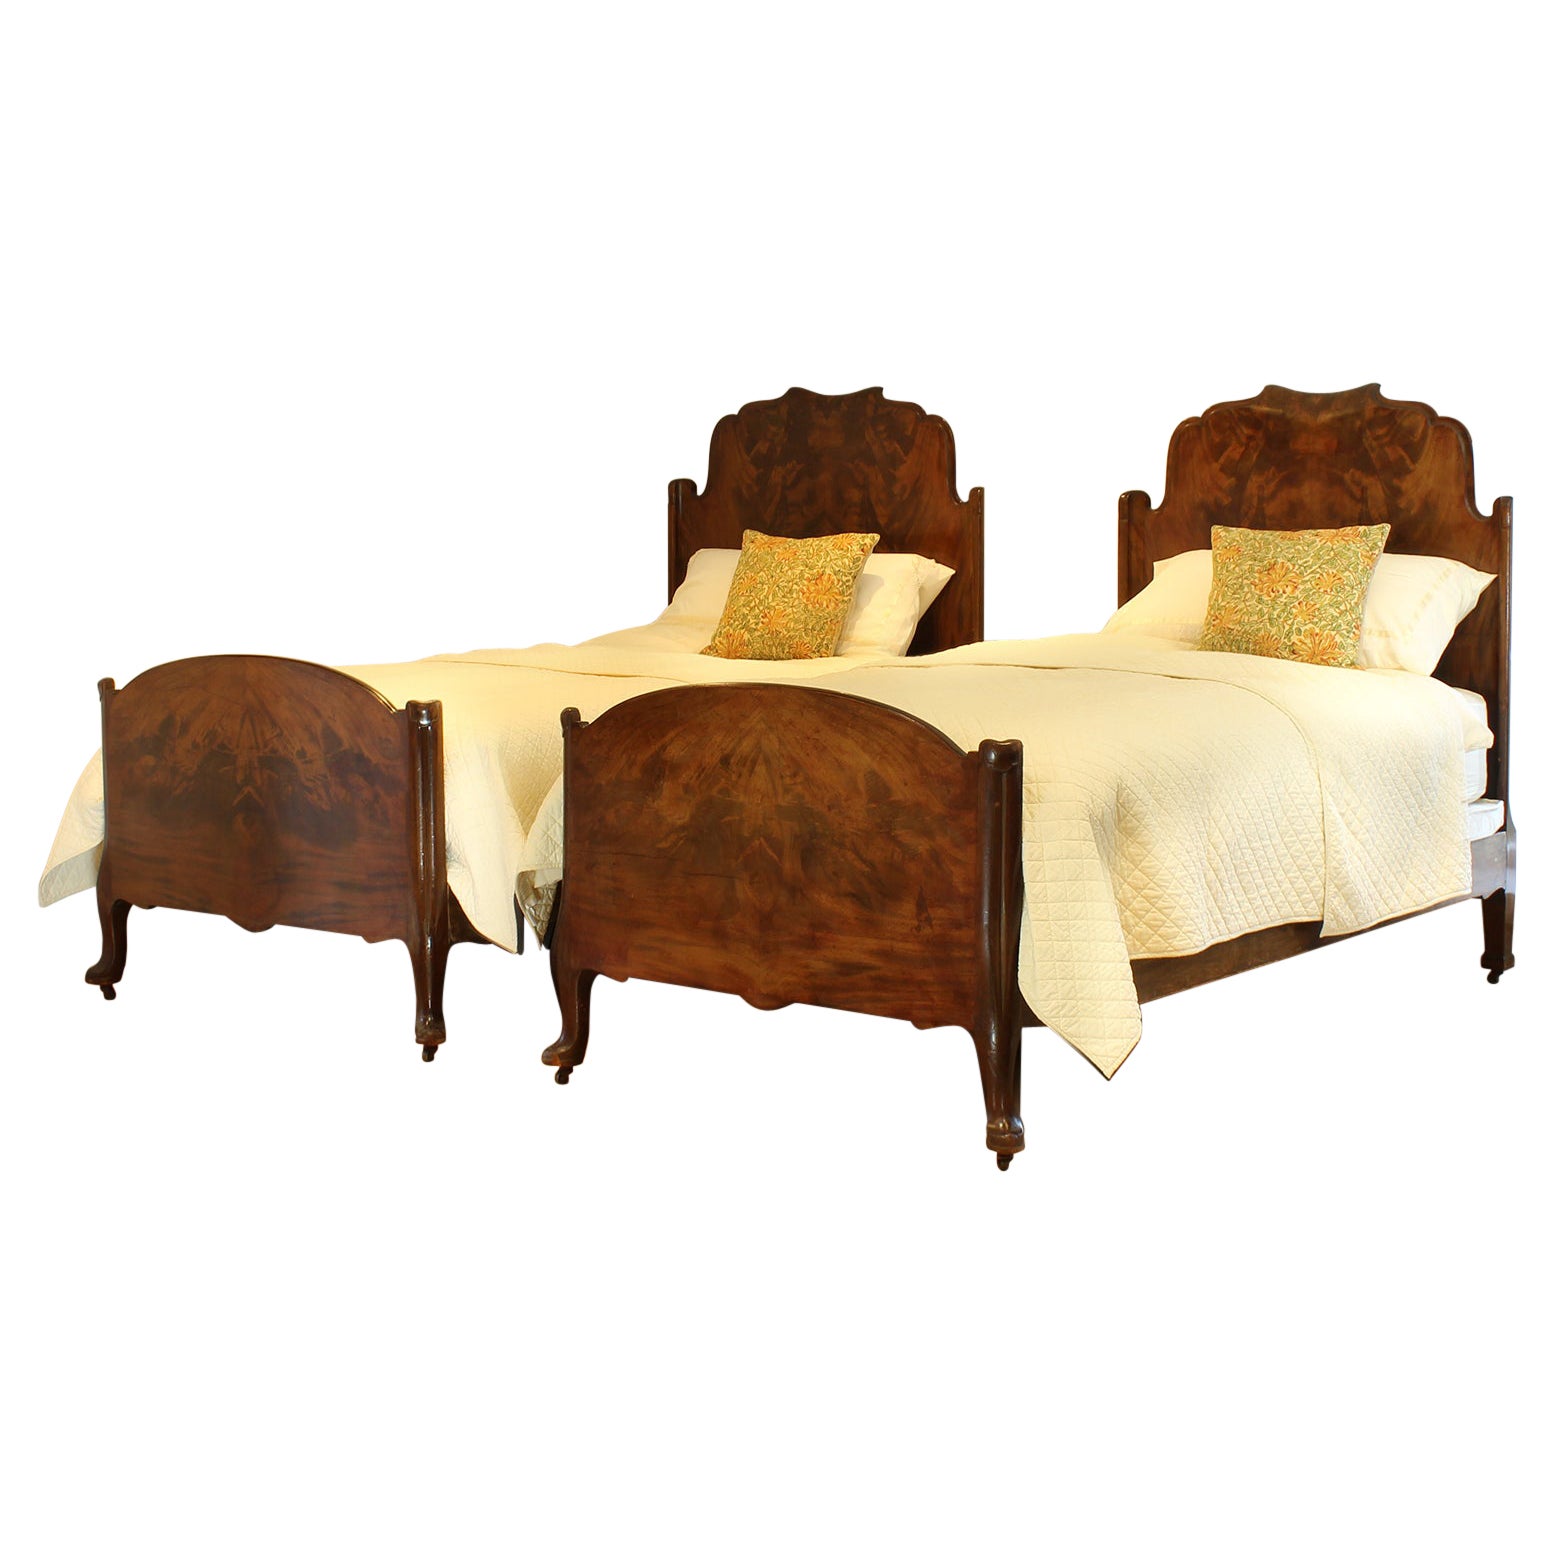 Pair of Flame Mahogany Antique Beds WP40